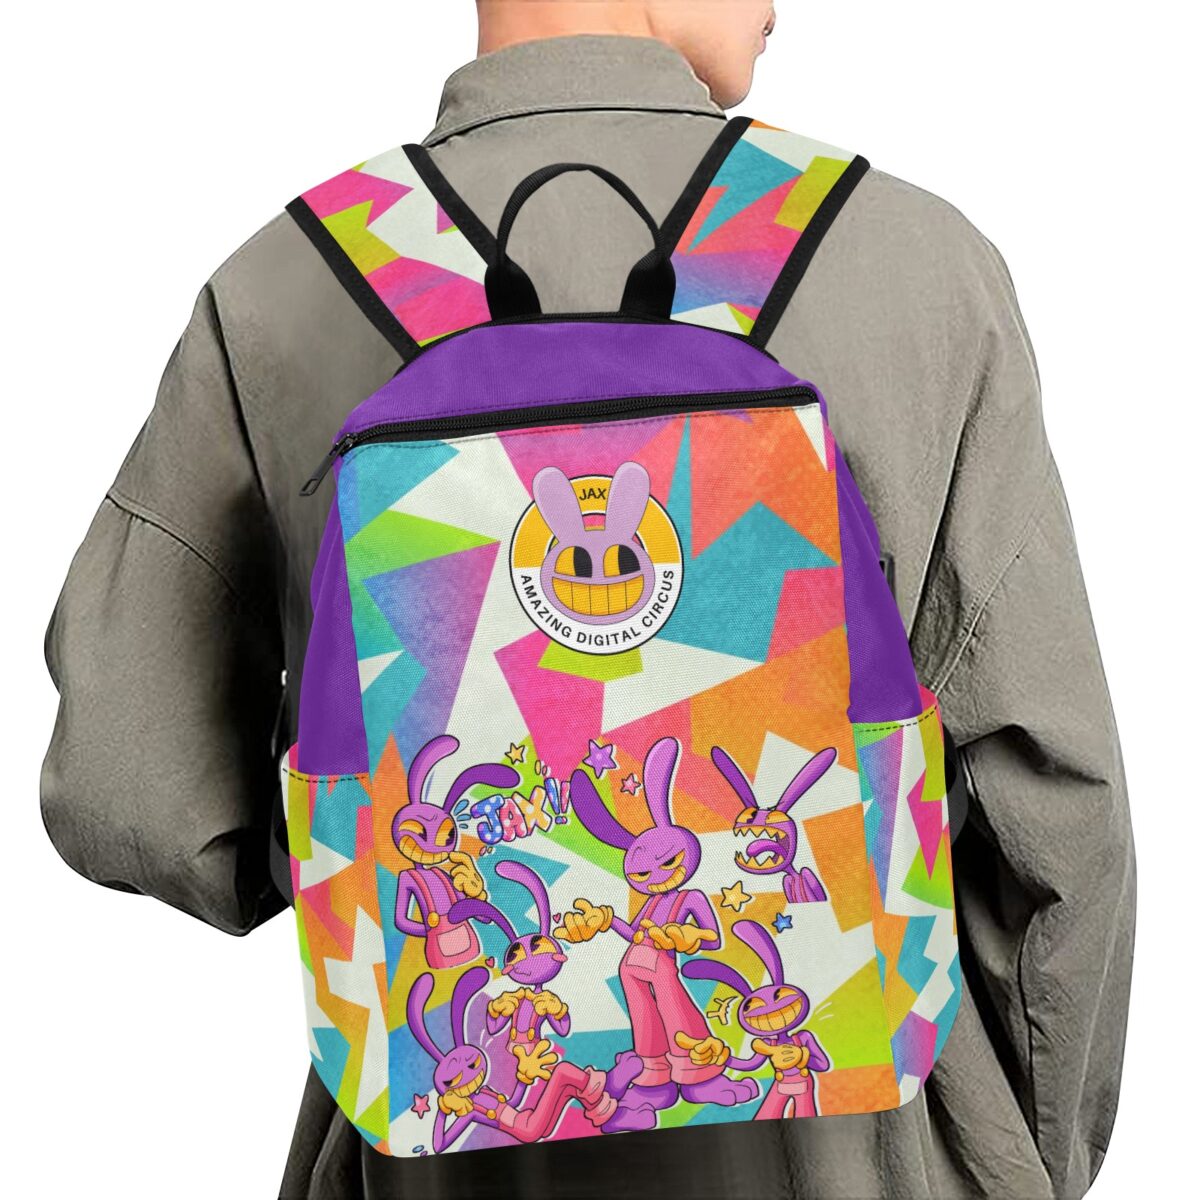 JAX Amazing Digital Circus Animated Series Character Backpack for School, Travel, Sports Book Bag Cool Kiddo 12